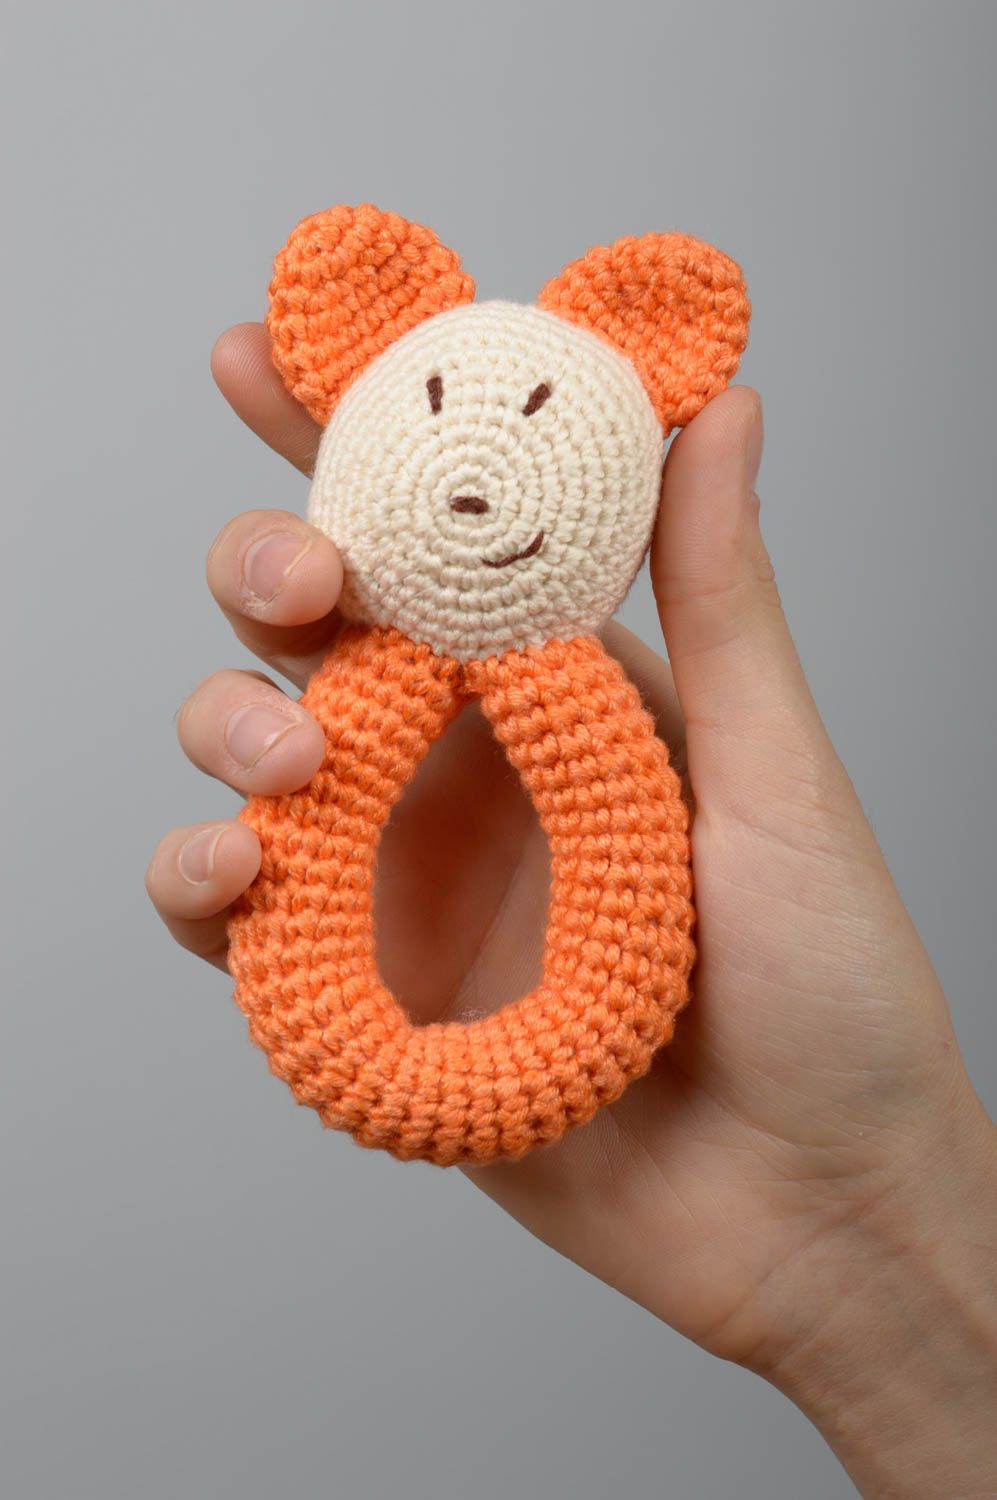 Beautiful handmade crochet toy soft toy for babies stuffed baby toy gift ideas photo 1